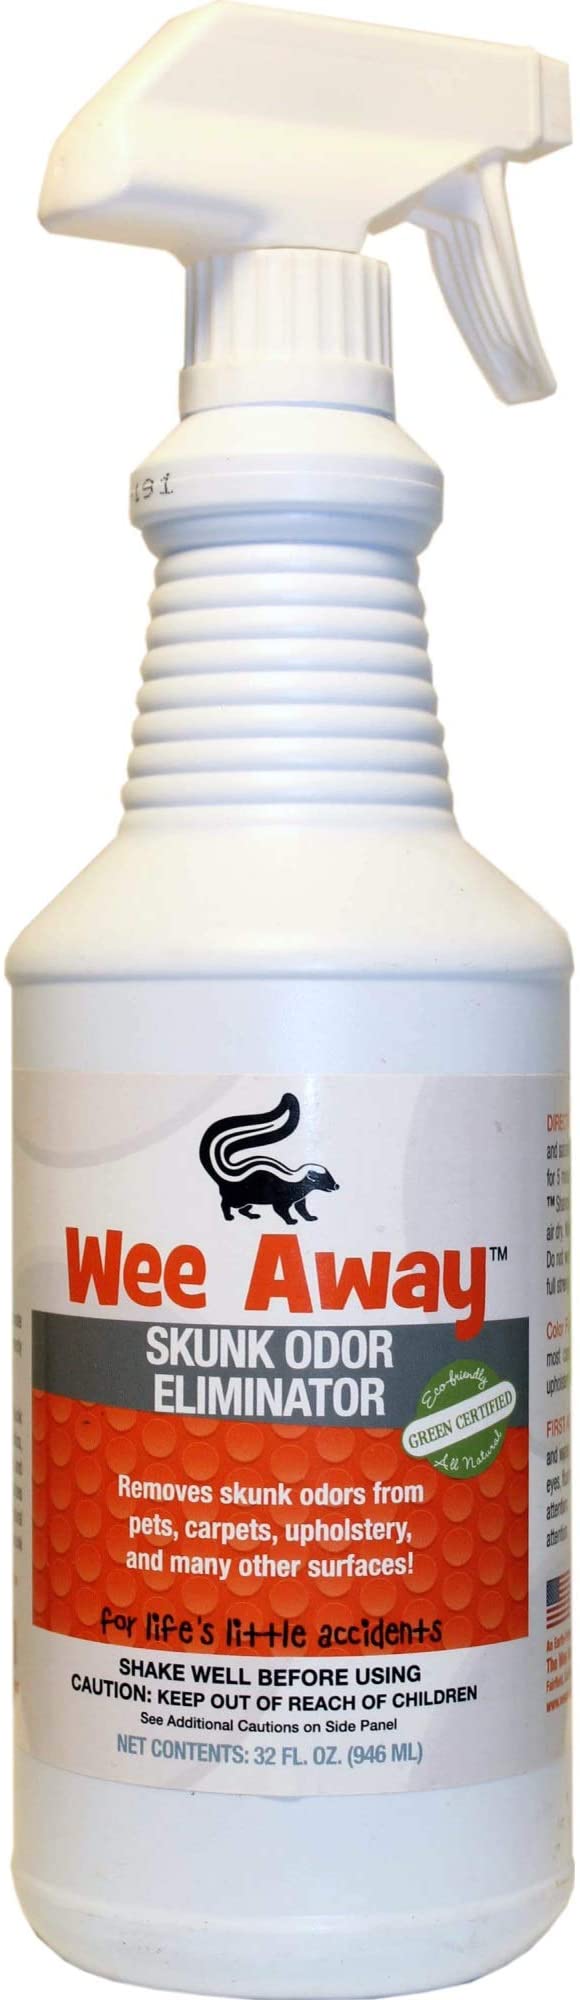 Wee Away - Skunk Odor Eliminator - Dashing Dawgs Grooming and Boutique 